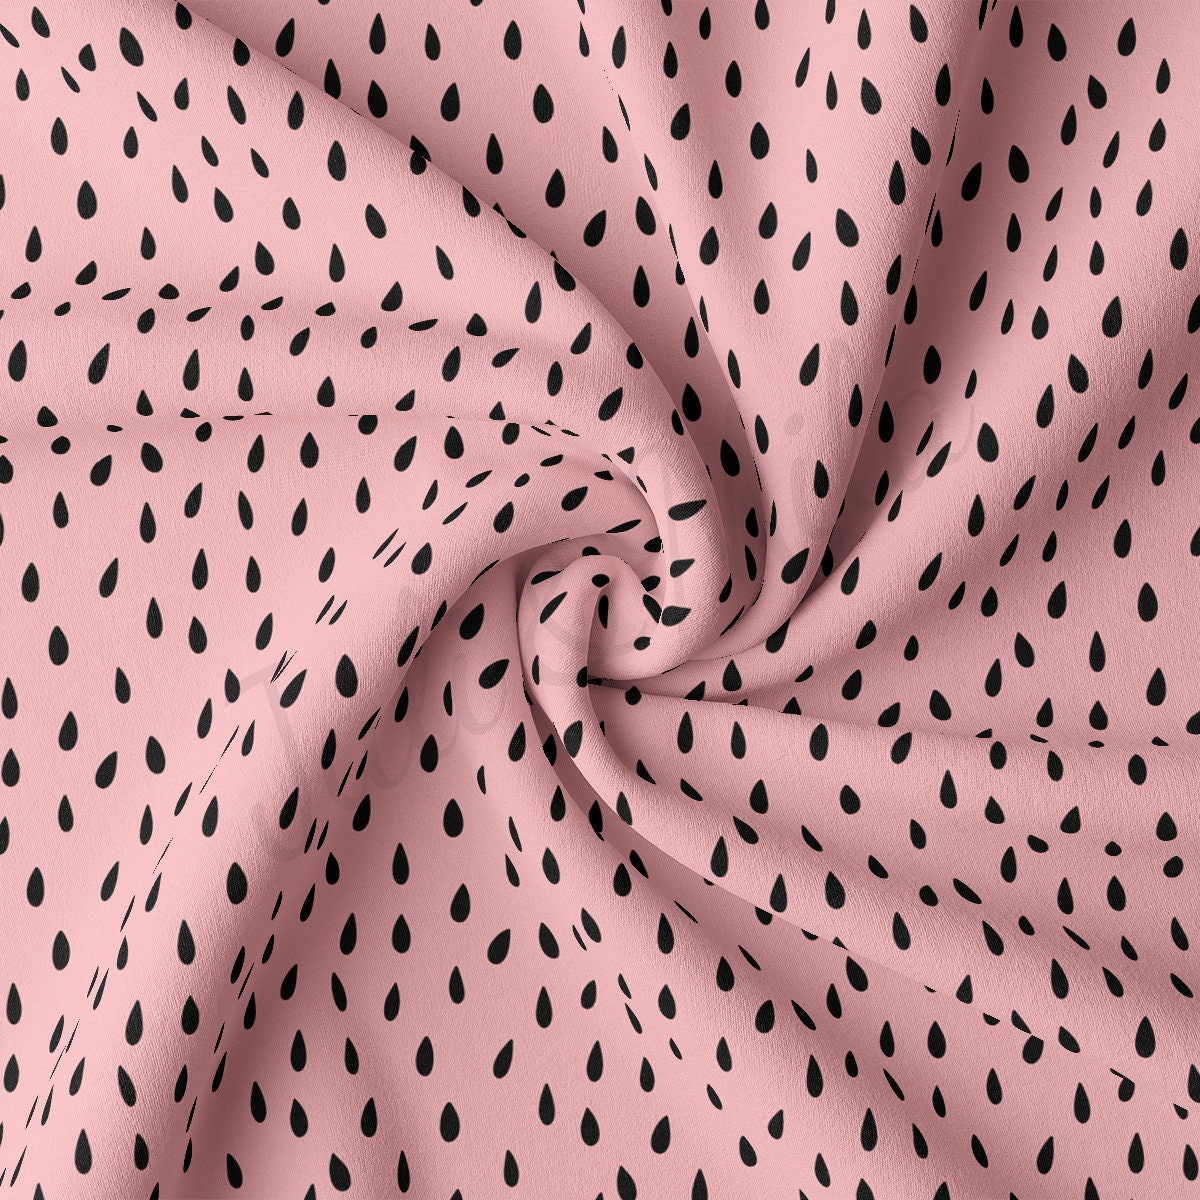 DBP Fabric Double Brushed Polyester DBP2484 Watermelon